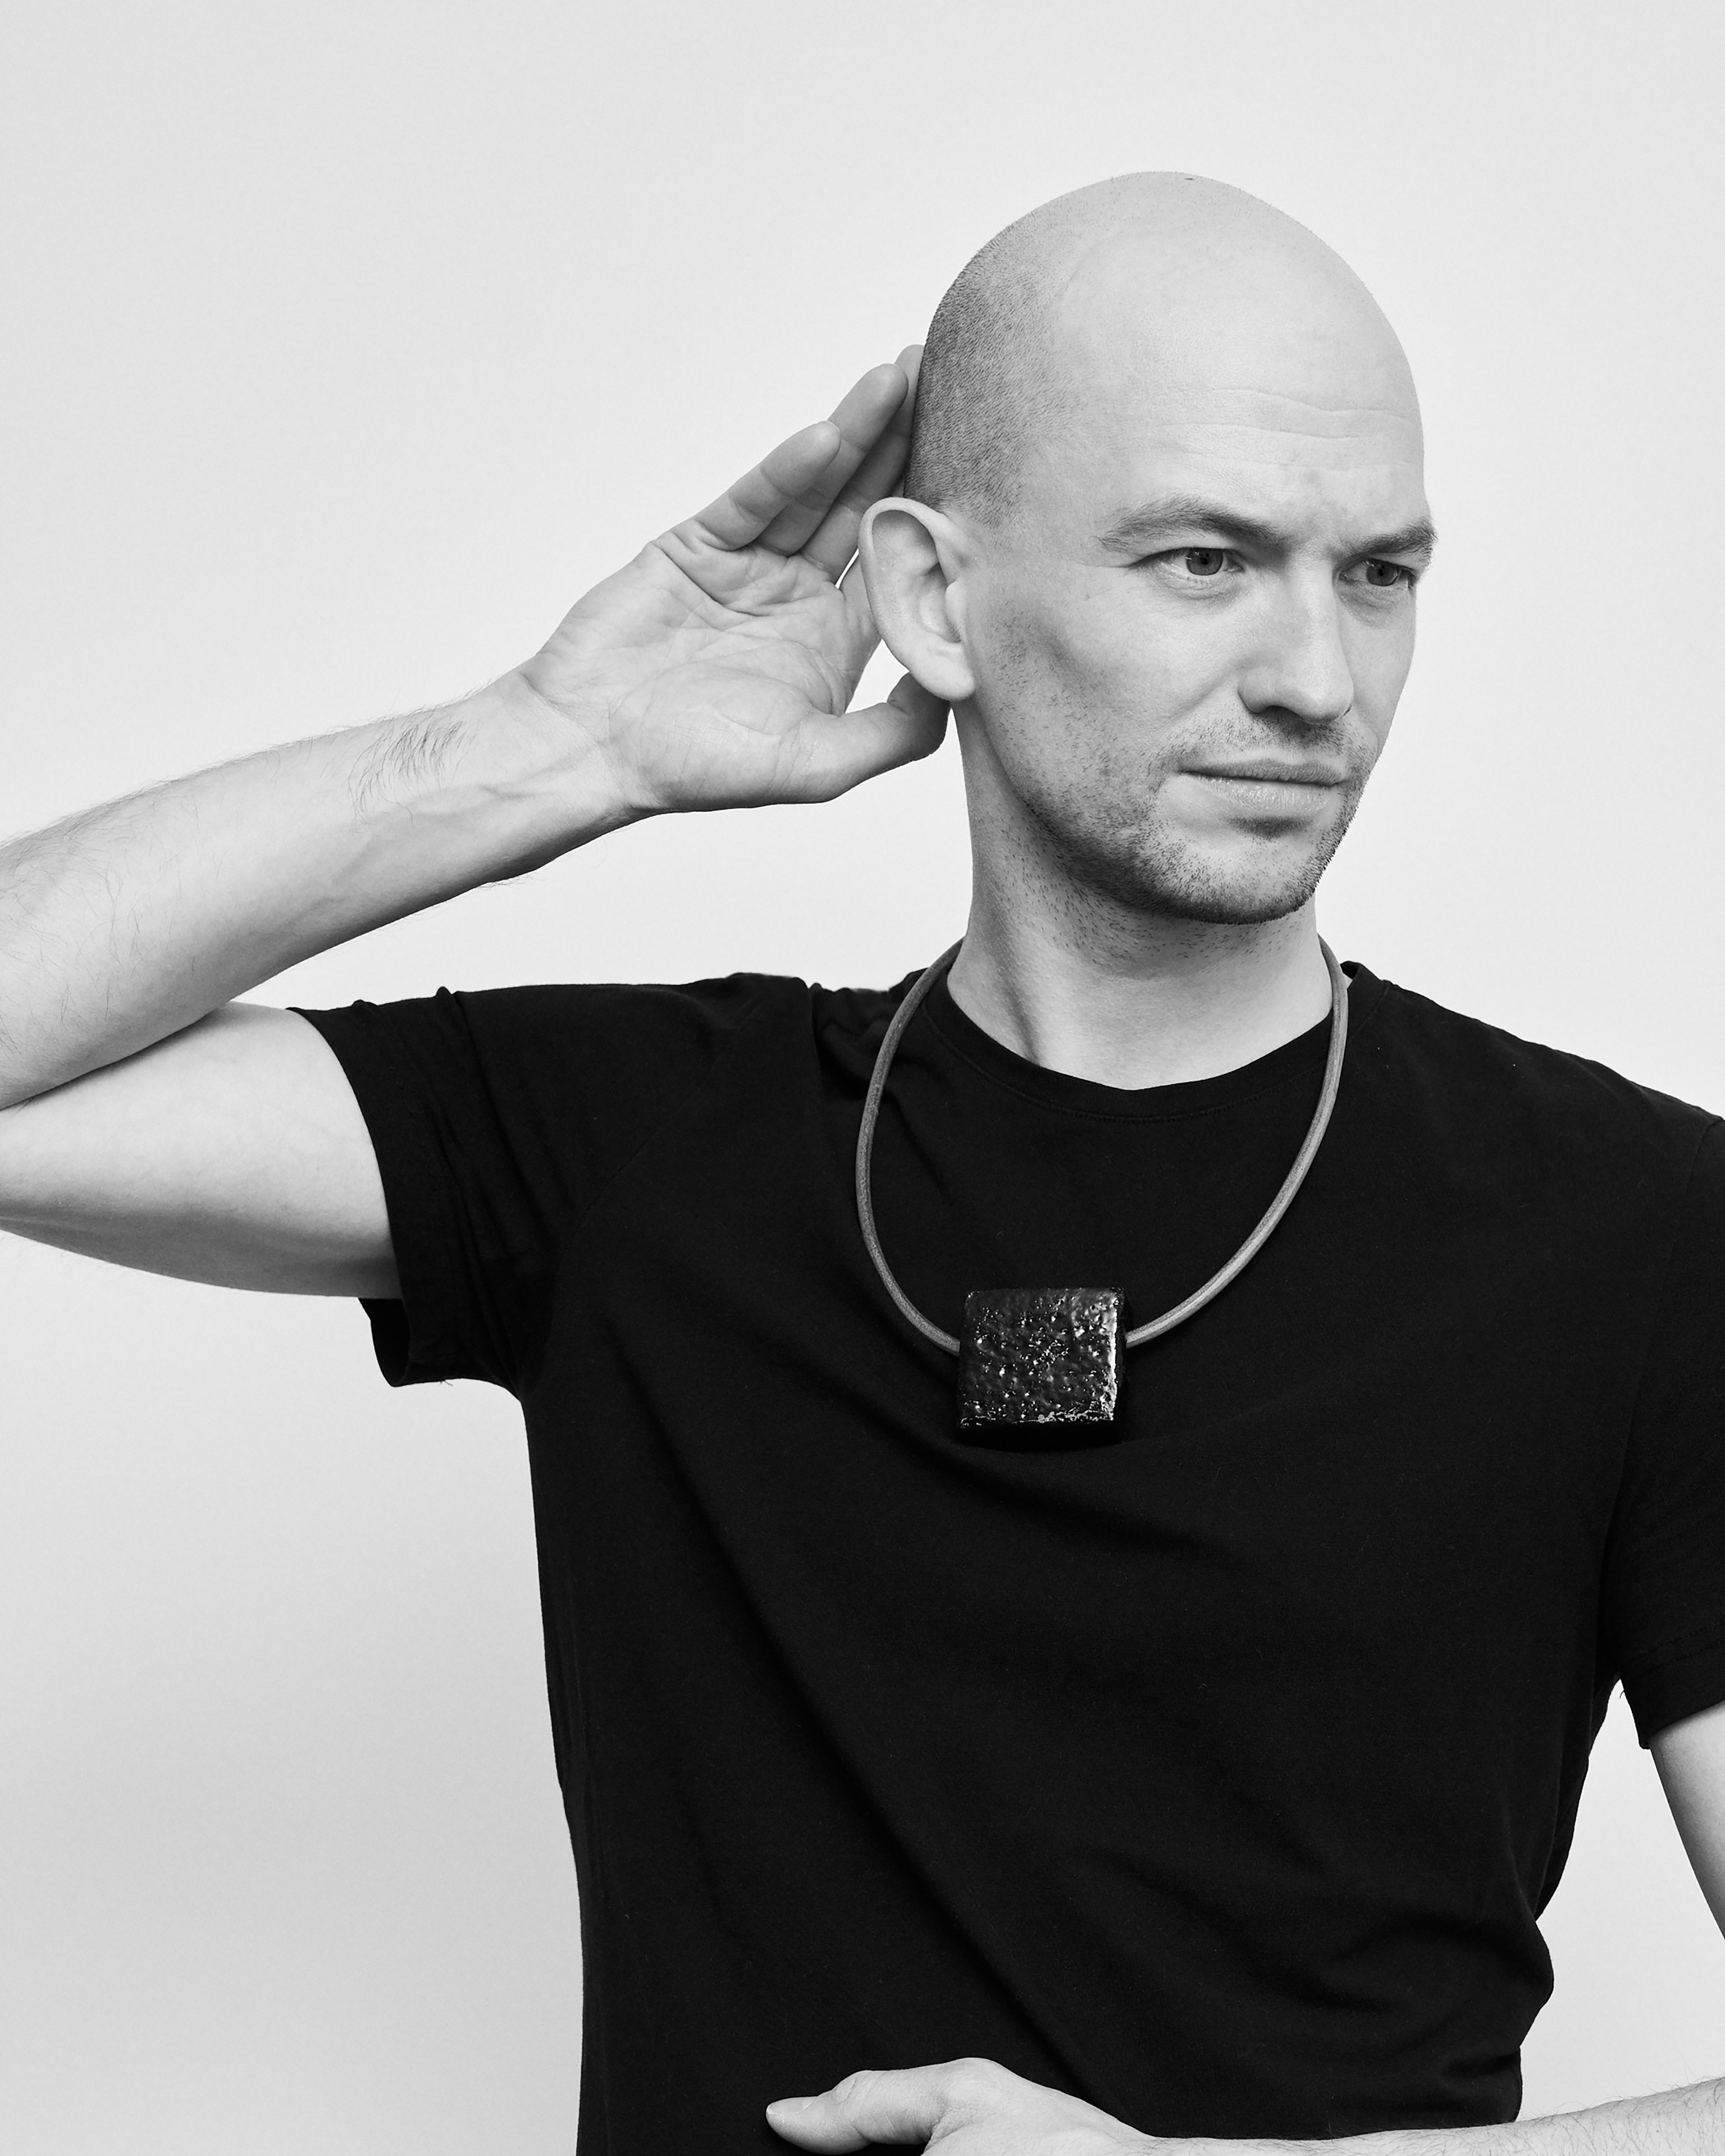 Artist Nick Oberthaler wears a short necklace with a silver ceramic pendant on a leather strap over a black T-shirt, his look is serious